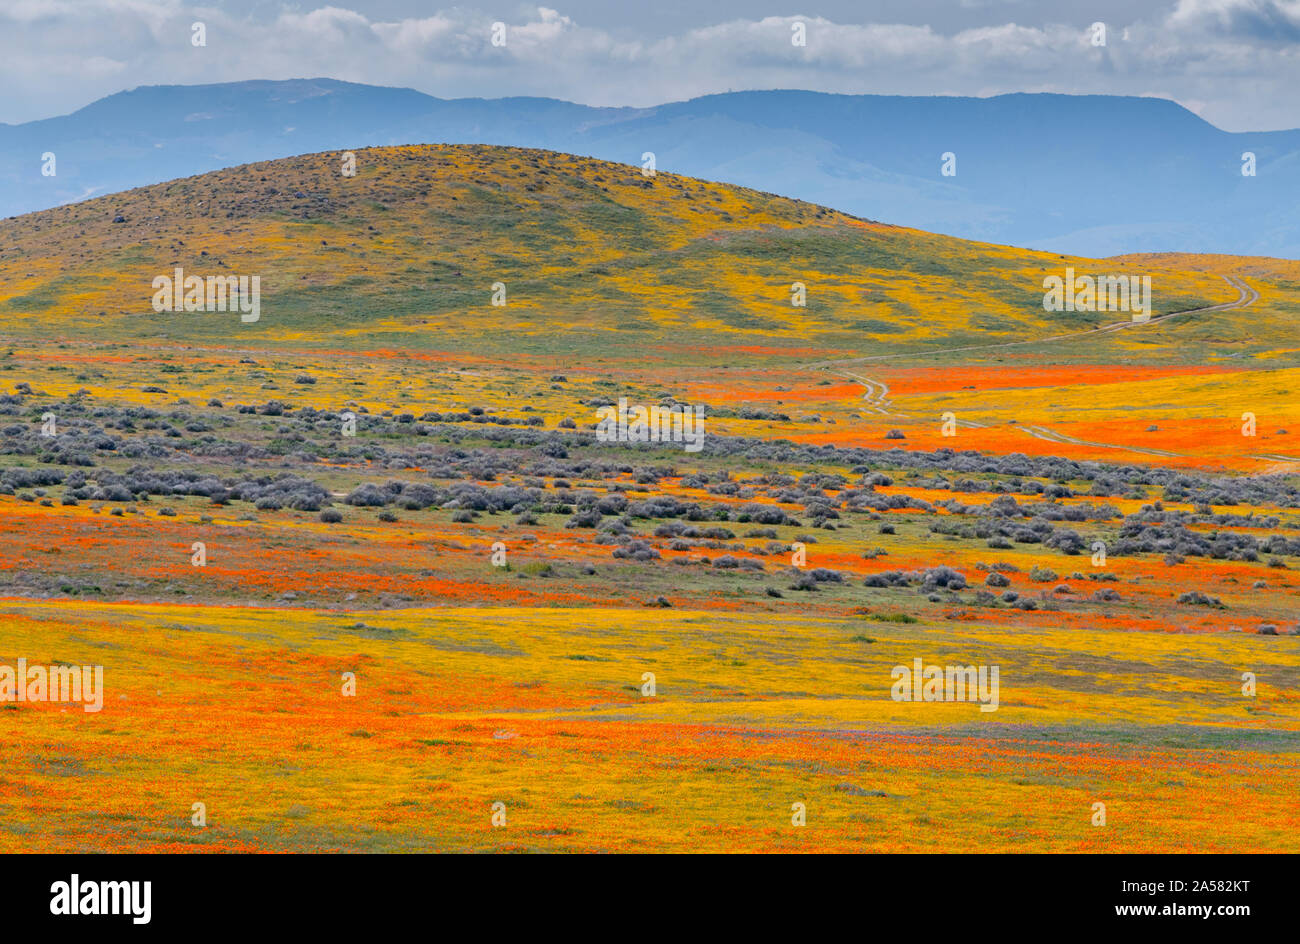 Landscape with rolling hills and blooming flowers, Antelope Butte, California, USA Stock Photo